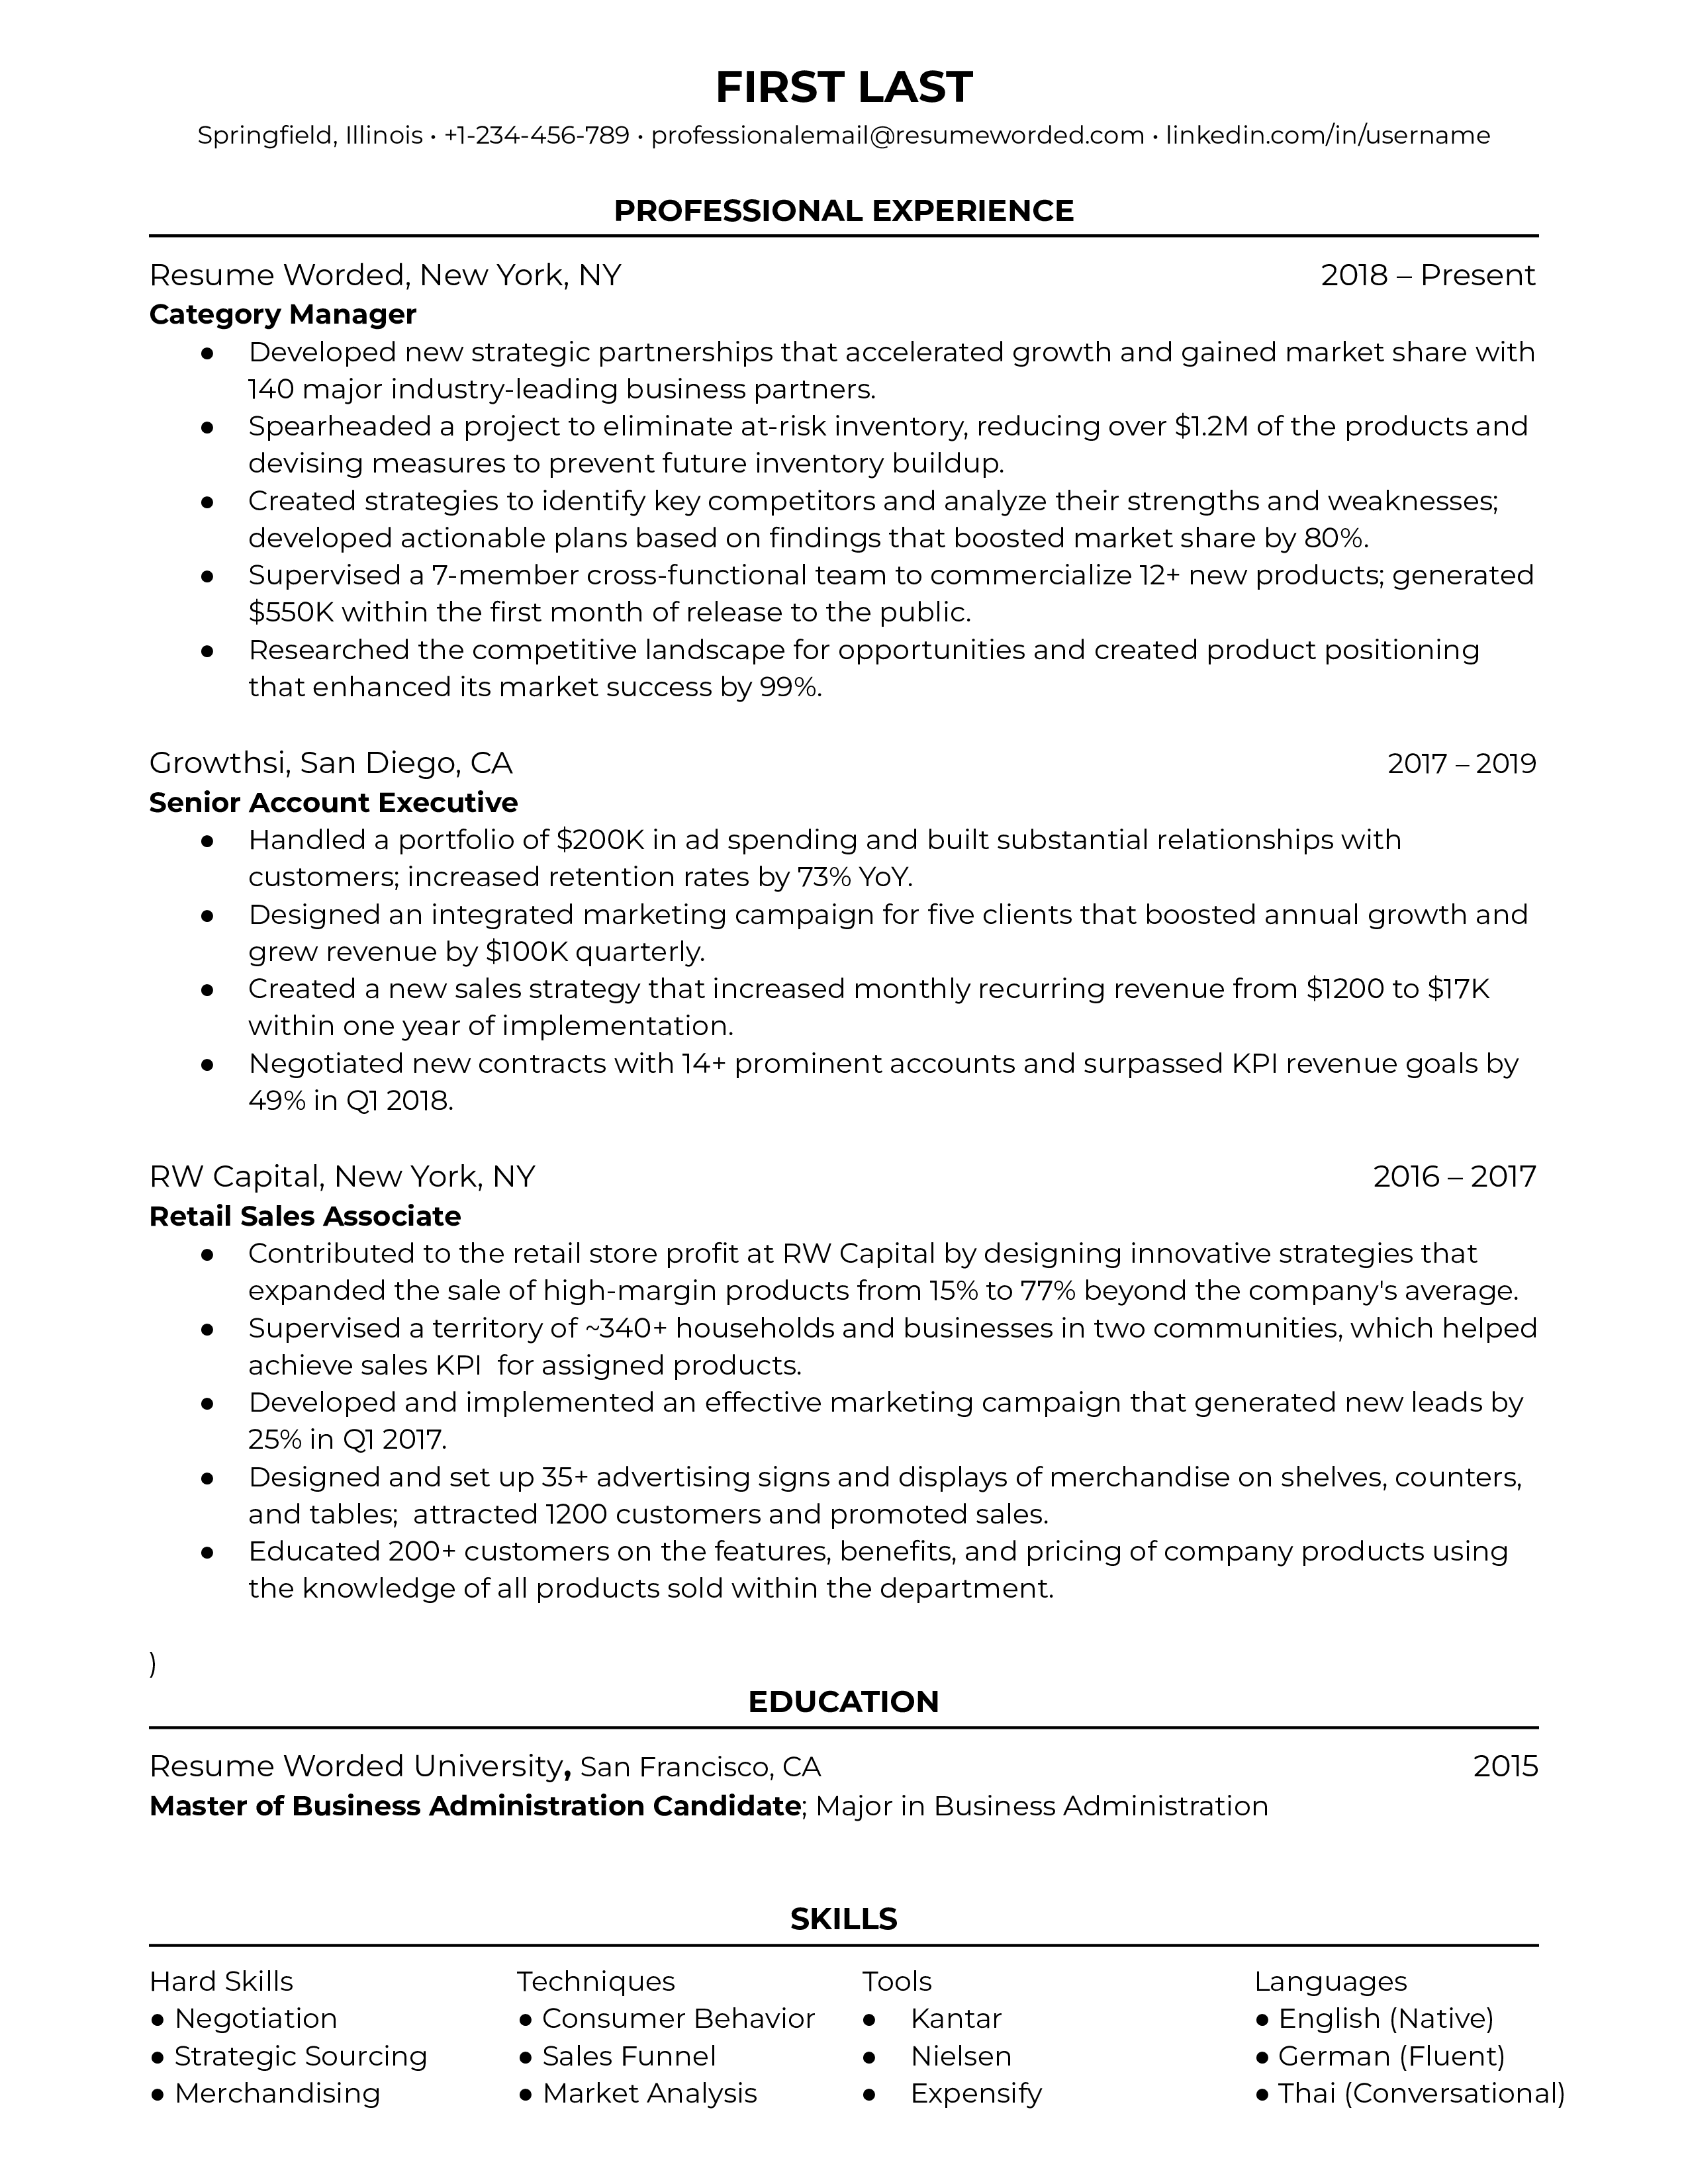 A category manager resume sample that highlights the candidate’s quantifiable success and specializations.